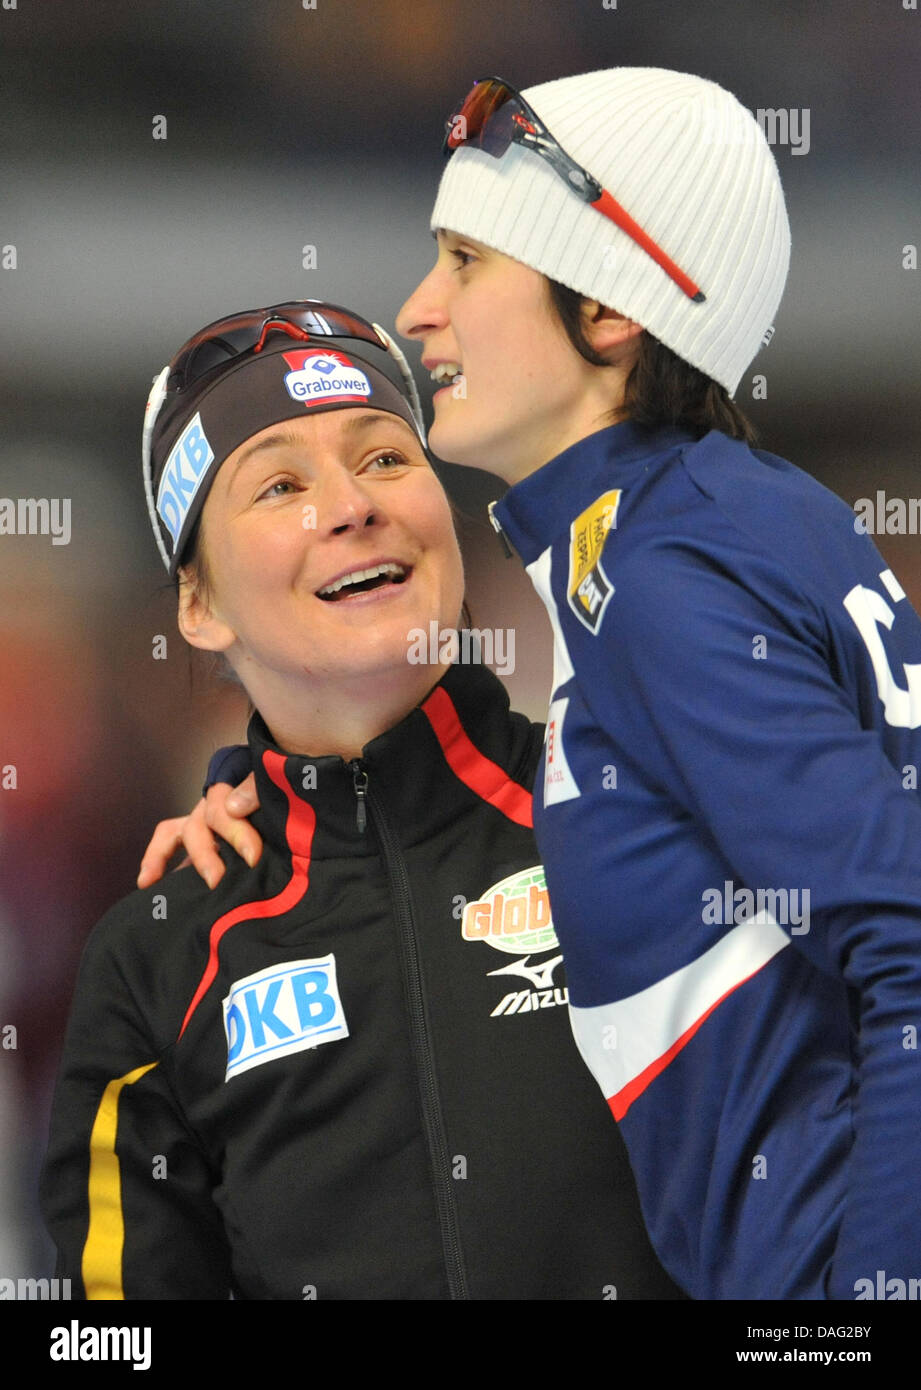 Czech speedskater Martina Sablikova cheers together with German third-place winner Claudia Pechstein (l)after the 5000 m women's race in the course of the Speedskating World Championships in Inzell, Germany, 12 March 2011. Salibovka came in first, Beckert second and Pechstein third. Photo: Friso Gentsch Stock Photo